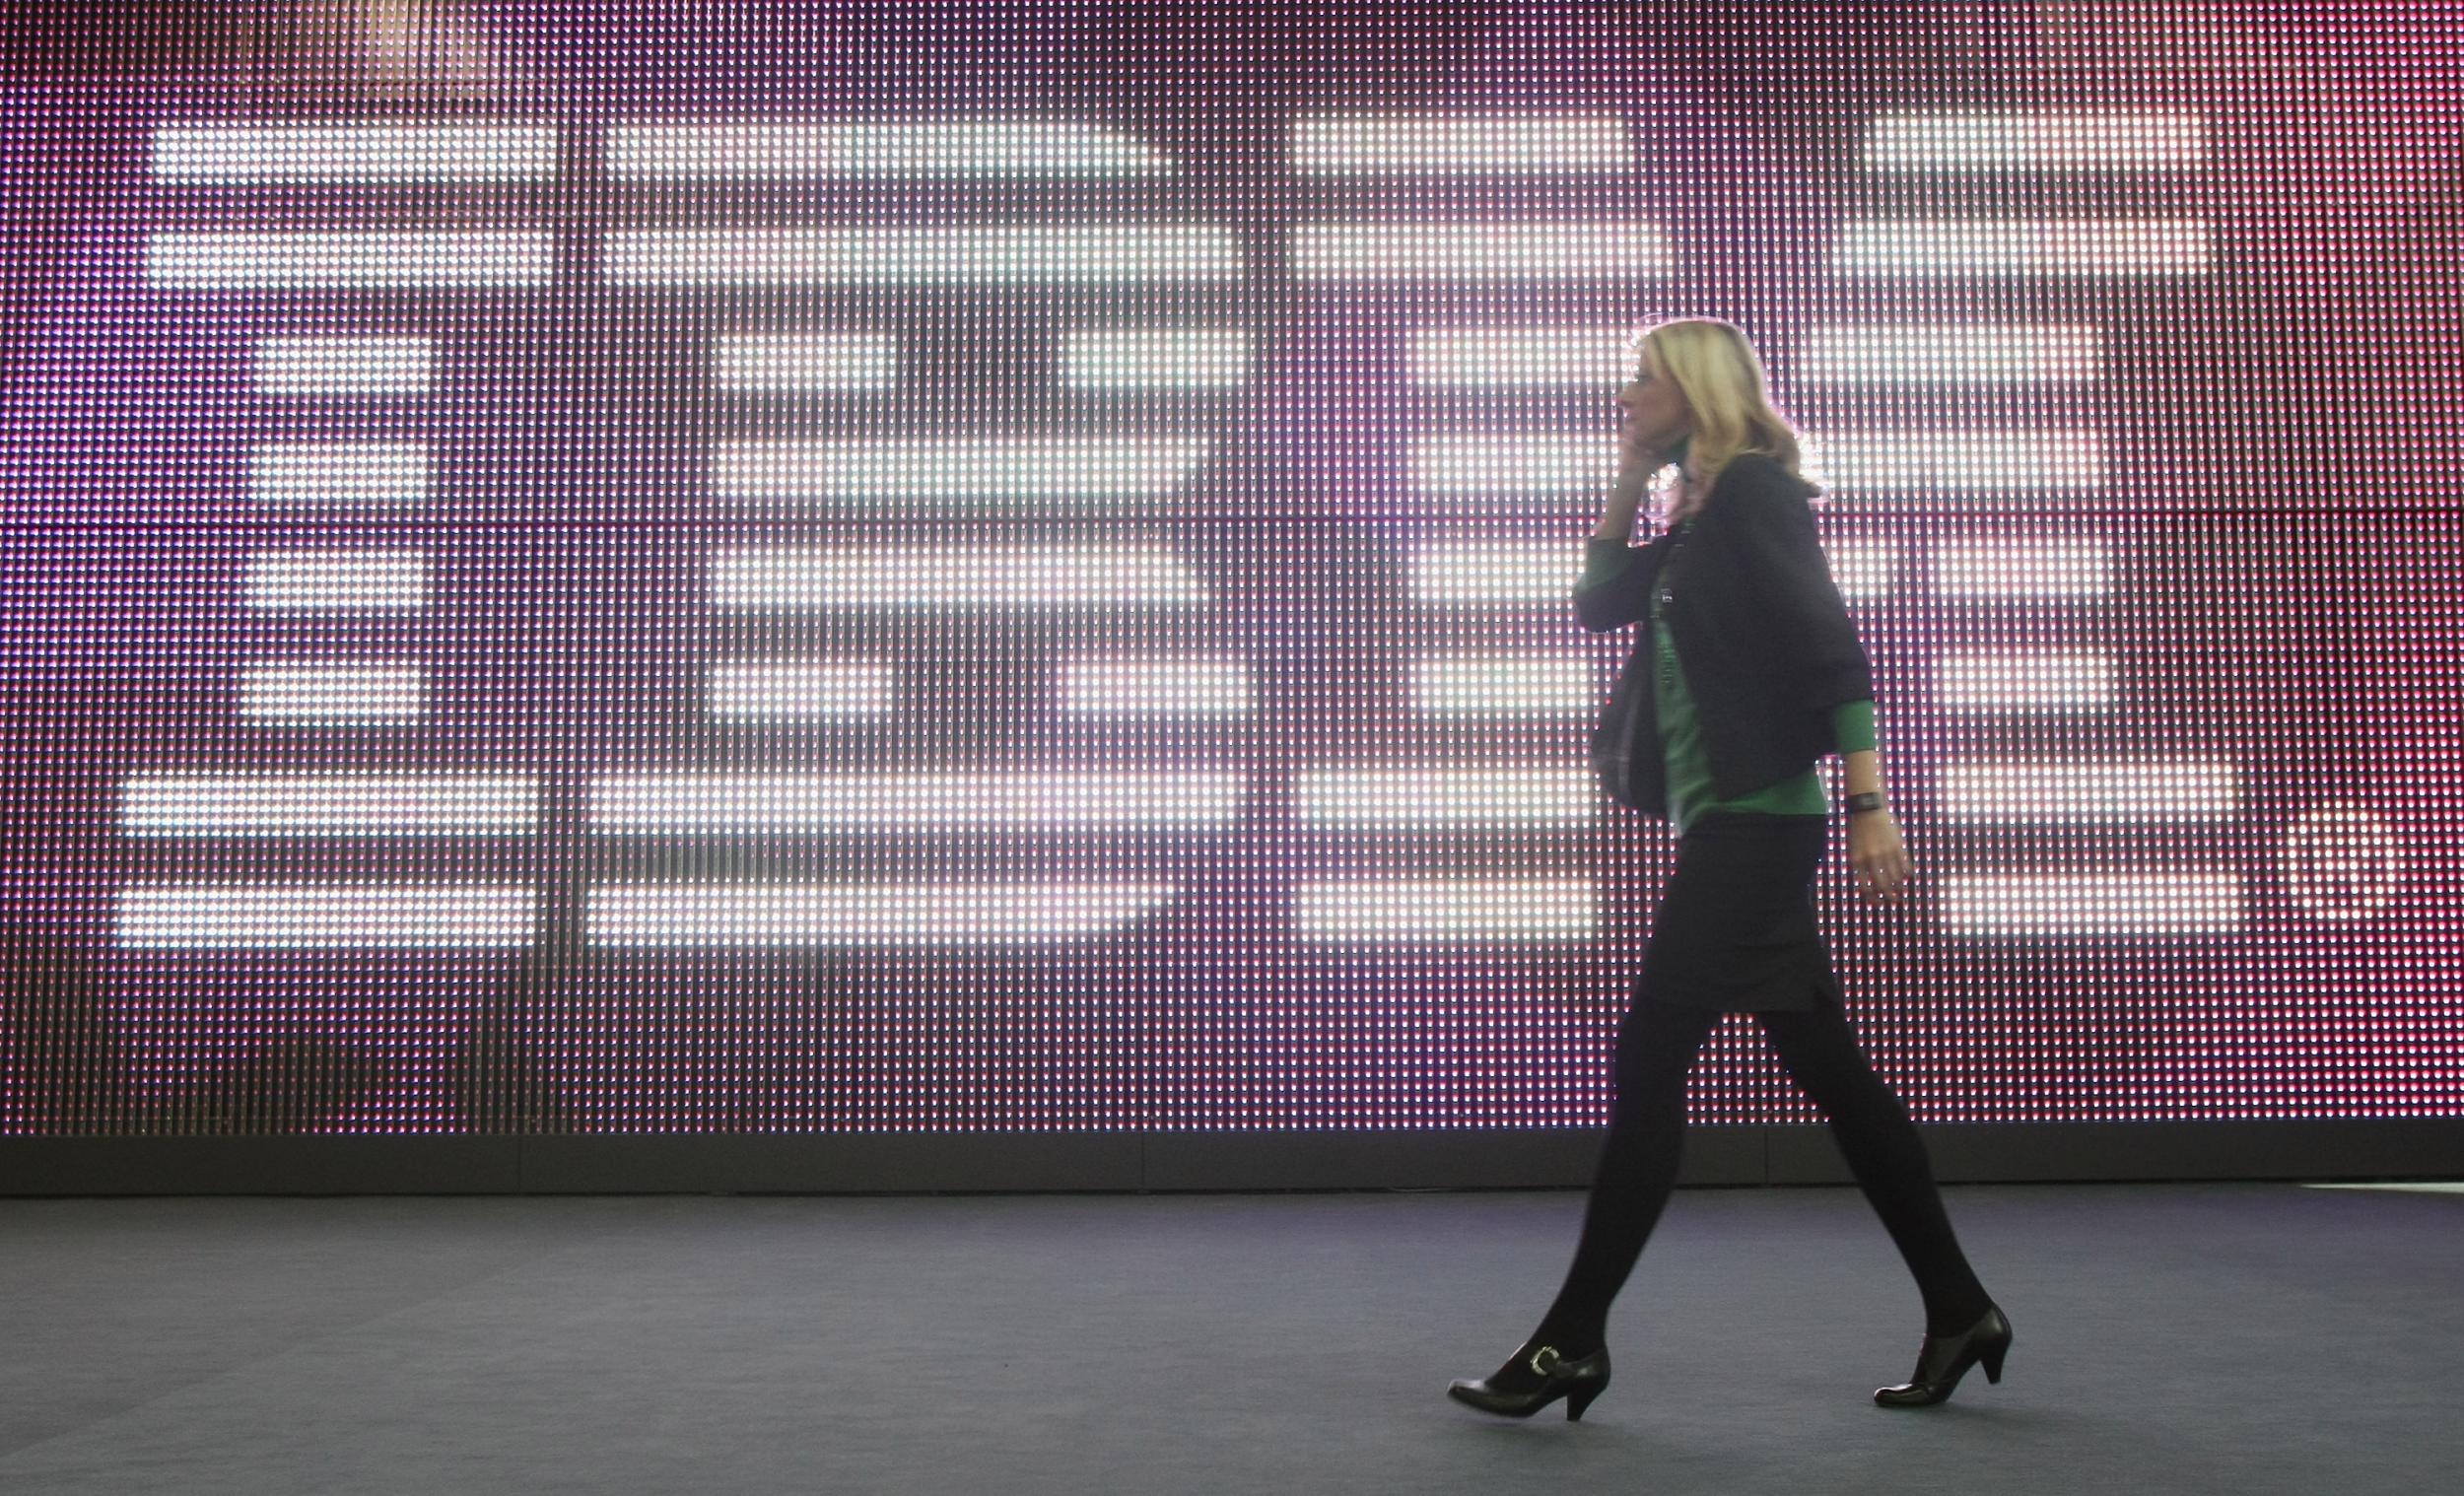 IBM pulled the campaign less than a week after it was introduced